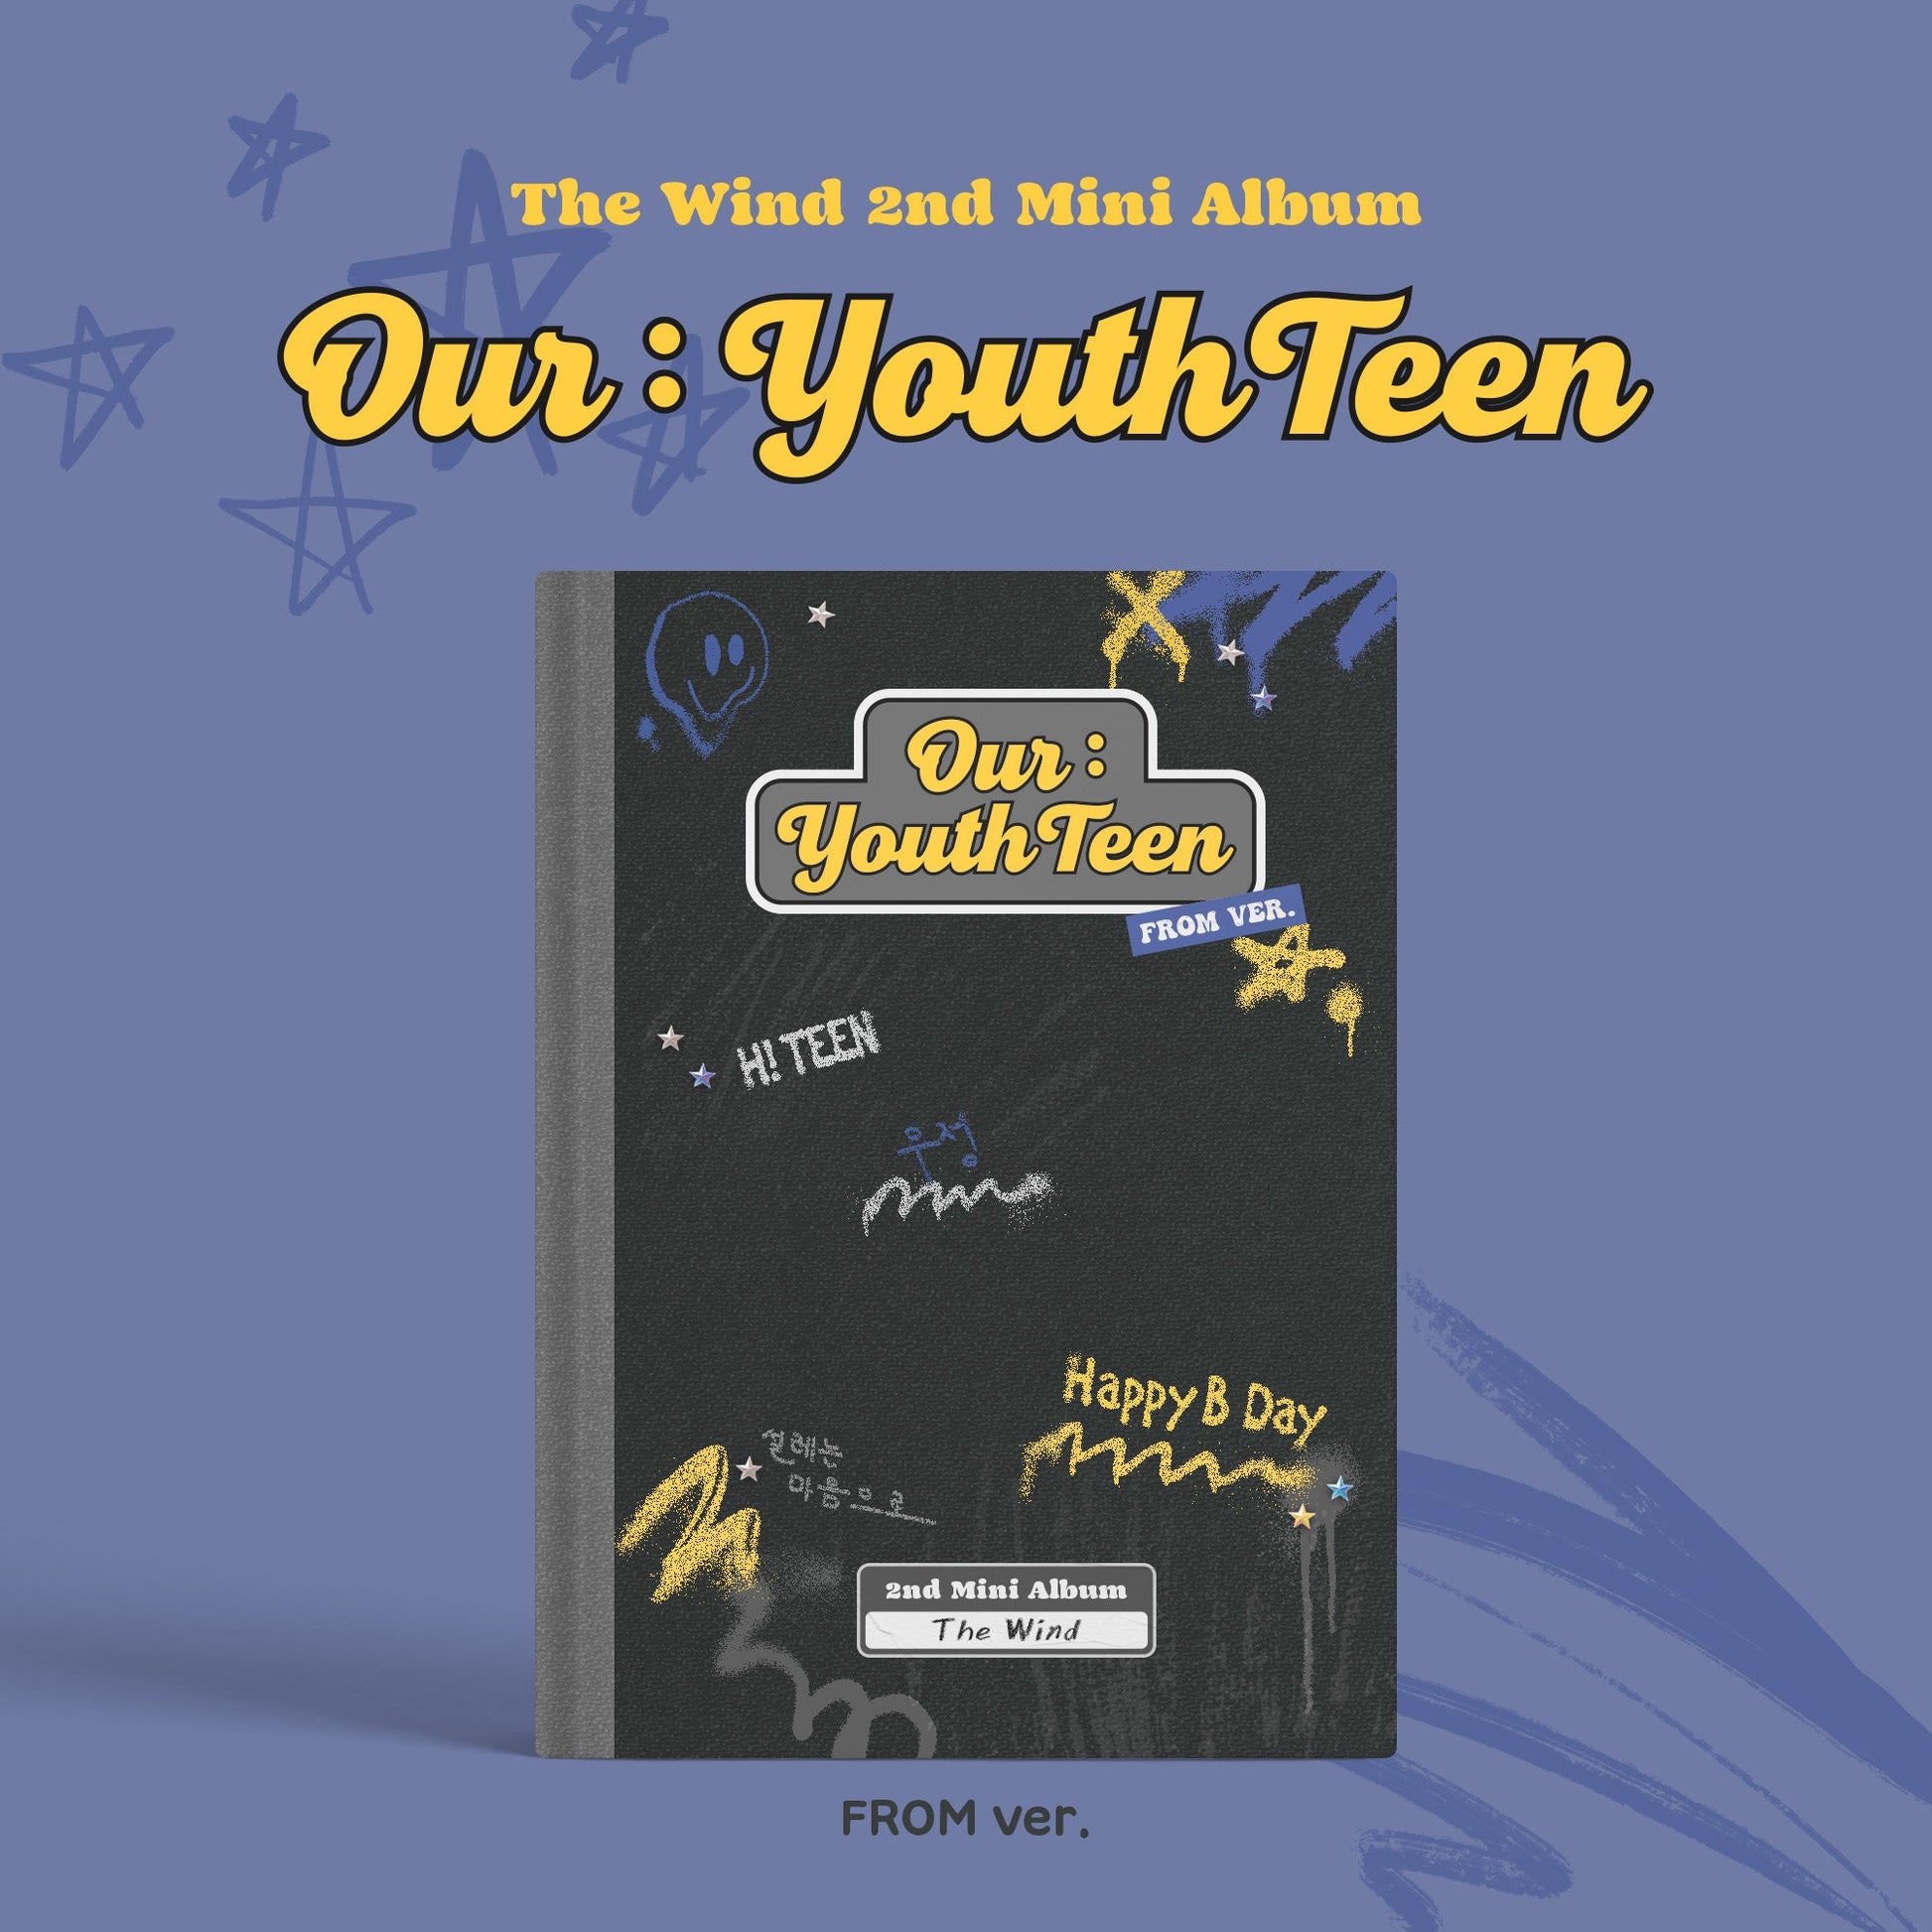 THE WIND 2ND MINI ALBUM 'OUR : YOUTHTEEN' FROM VERSION COVER